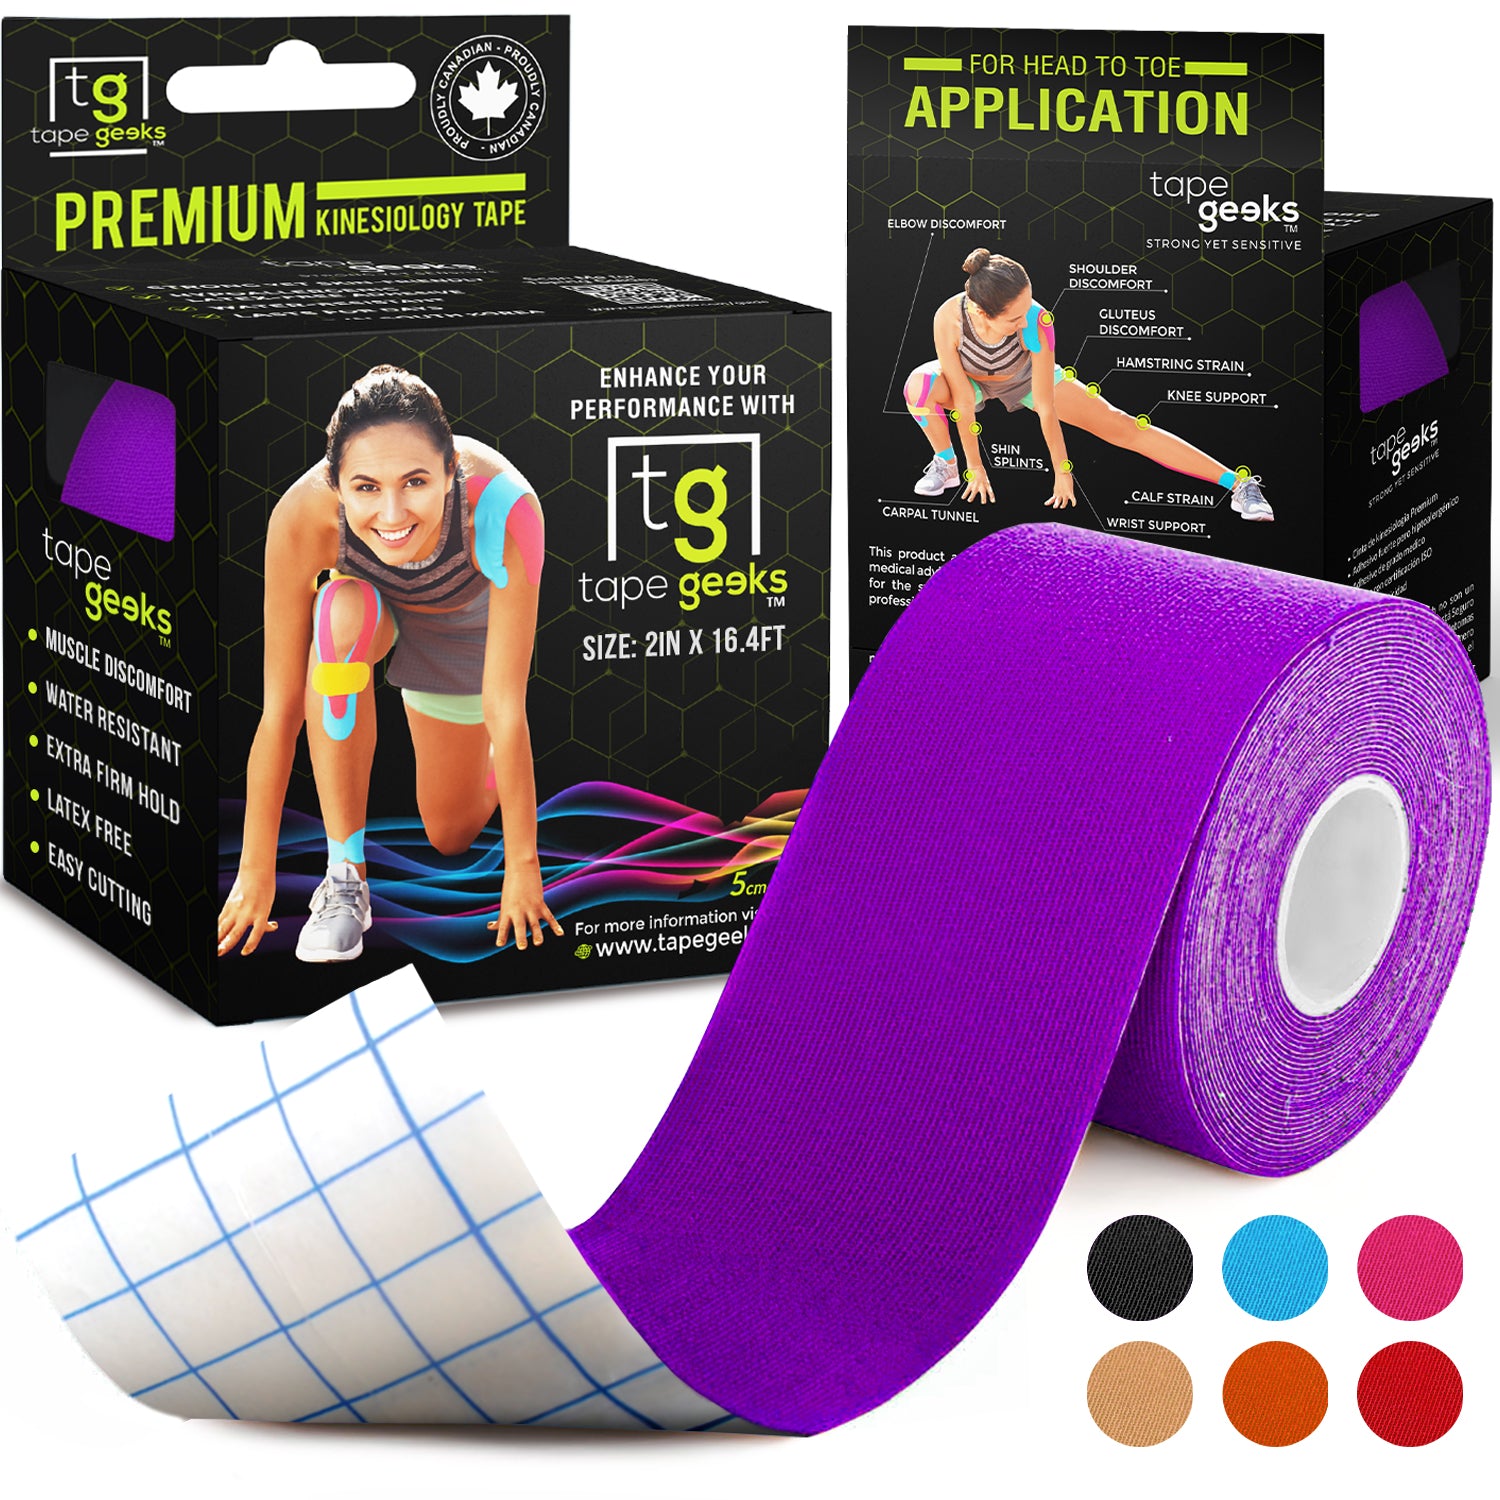 How to support large breasts using kinesiology tape